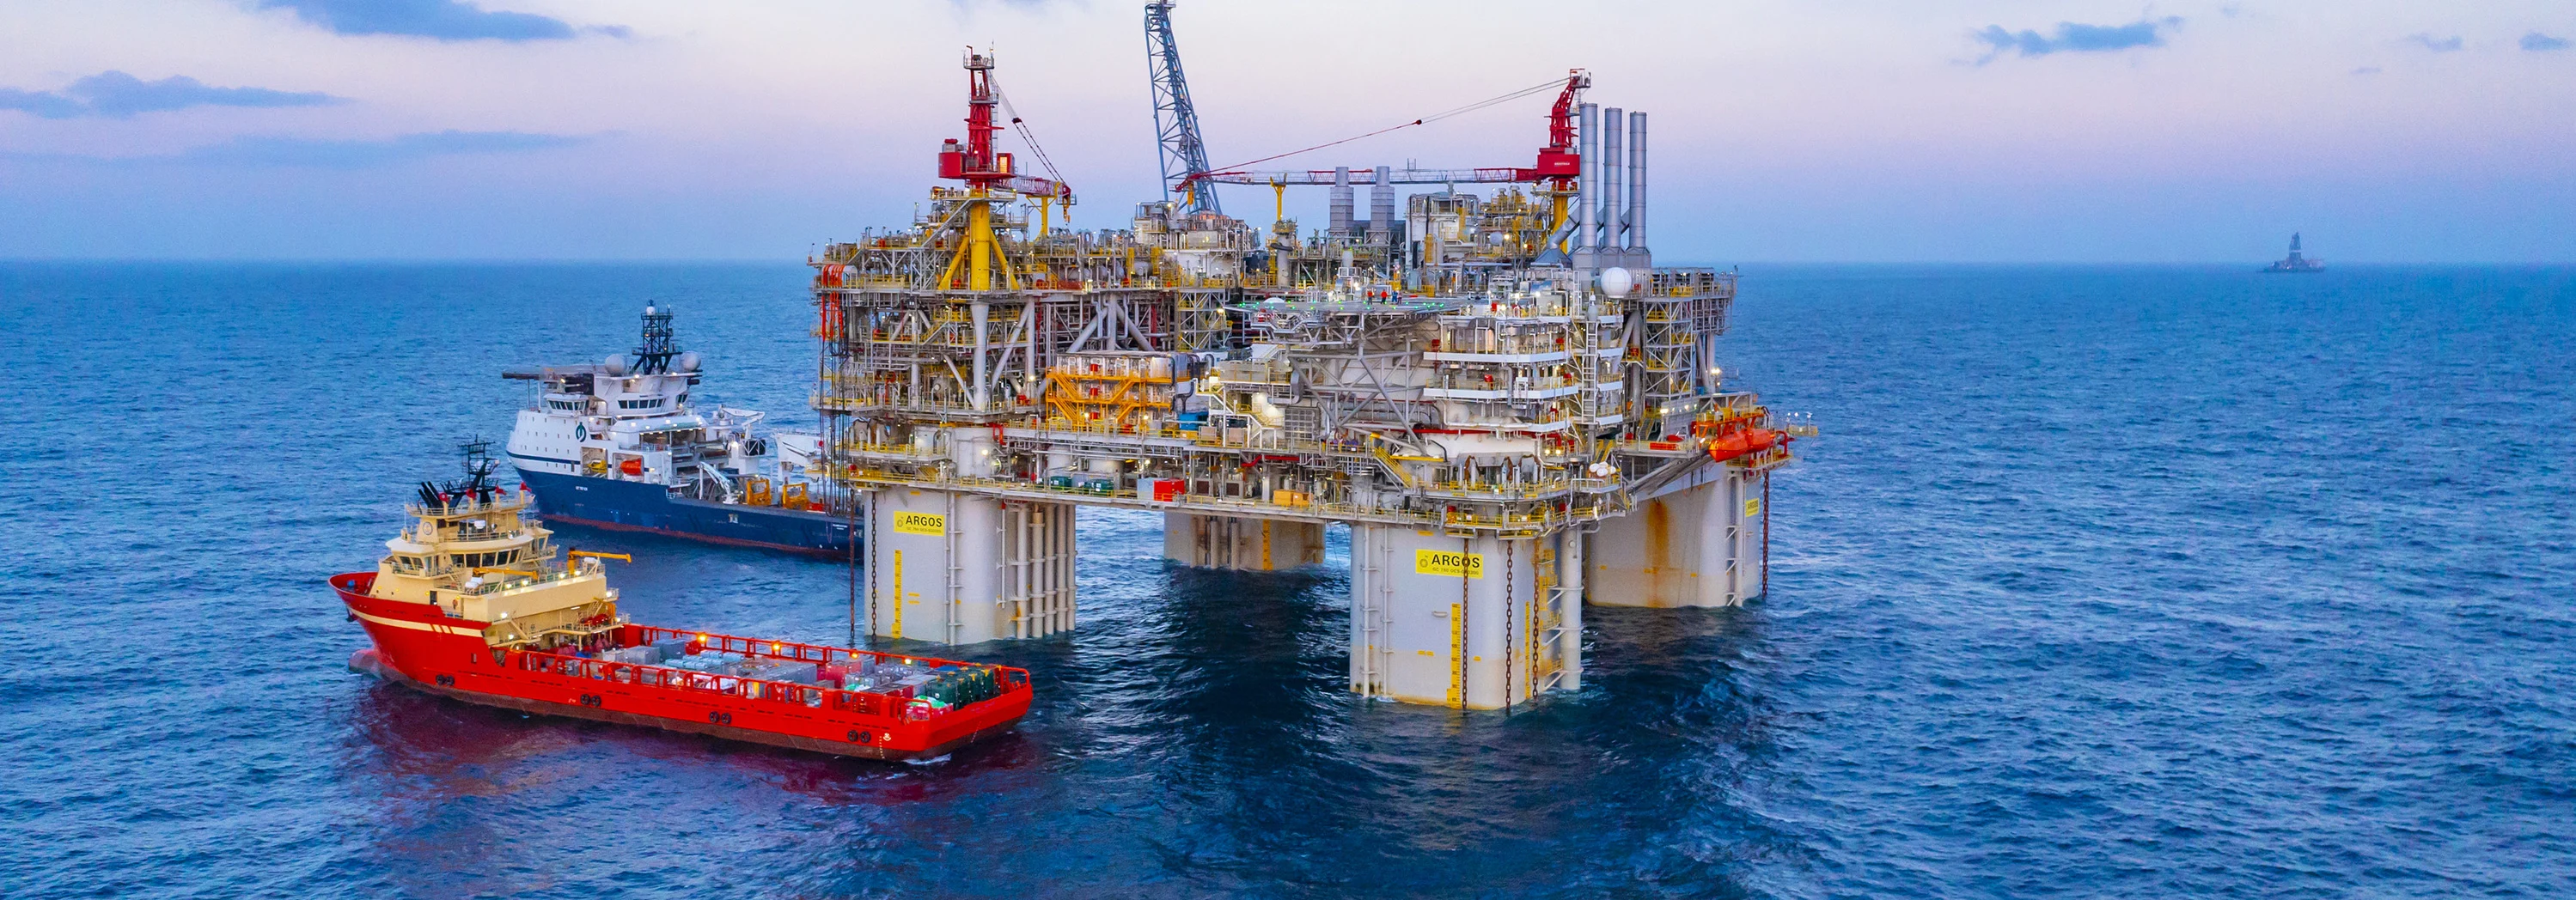 bp’s new Argos platform in the Gulf of Mexico